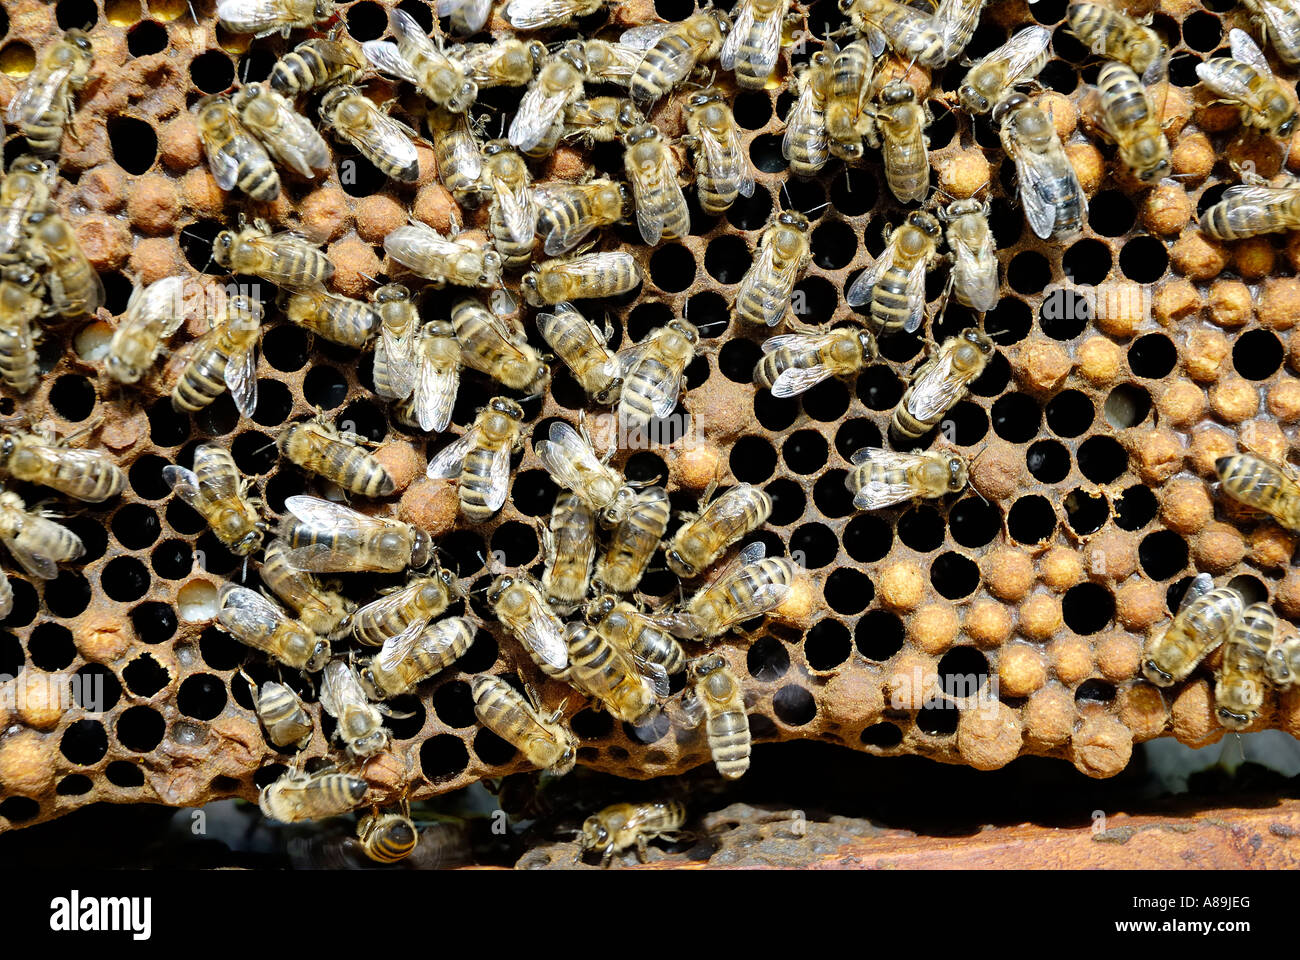 Bees, apis melifera ssp carnica on the closed cells of drone puppae Stock Photo